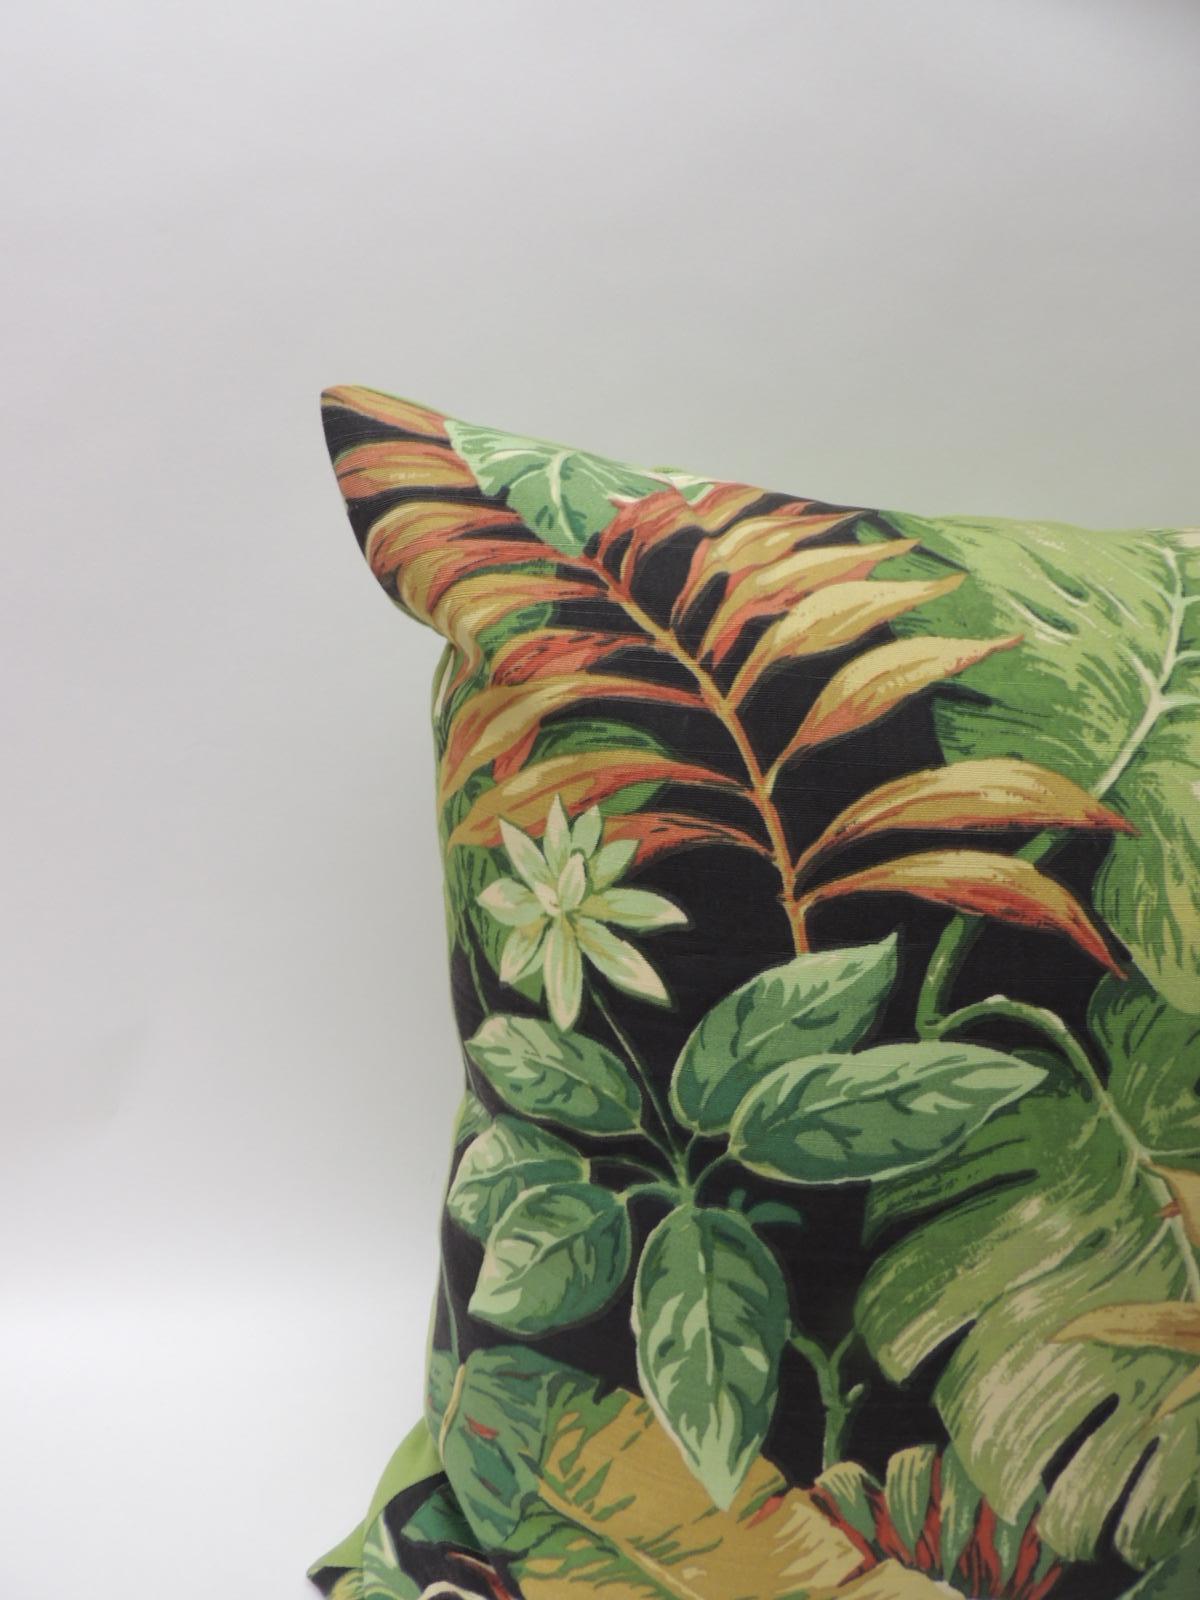 Tropical large bark cloth decorative floor pillow with textured vintage linen backing in acid green. Fabric depicting banana, palm and elephant ears foliage. In shades of green, orange, yellow on a dark black background. Palm Beach boho-chic.